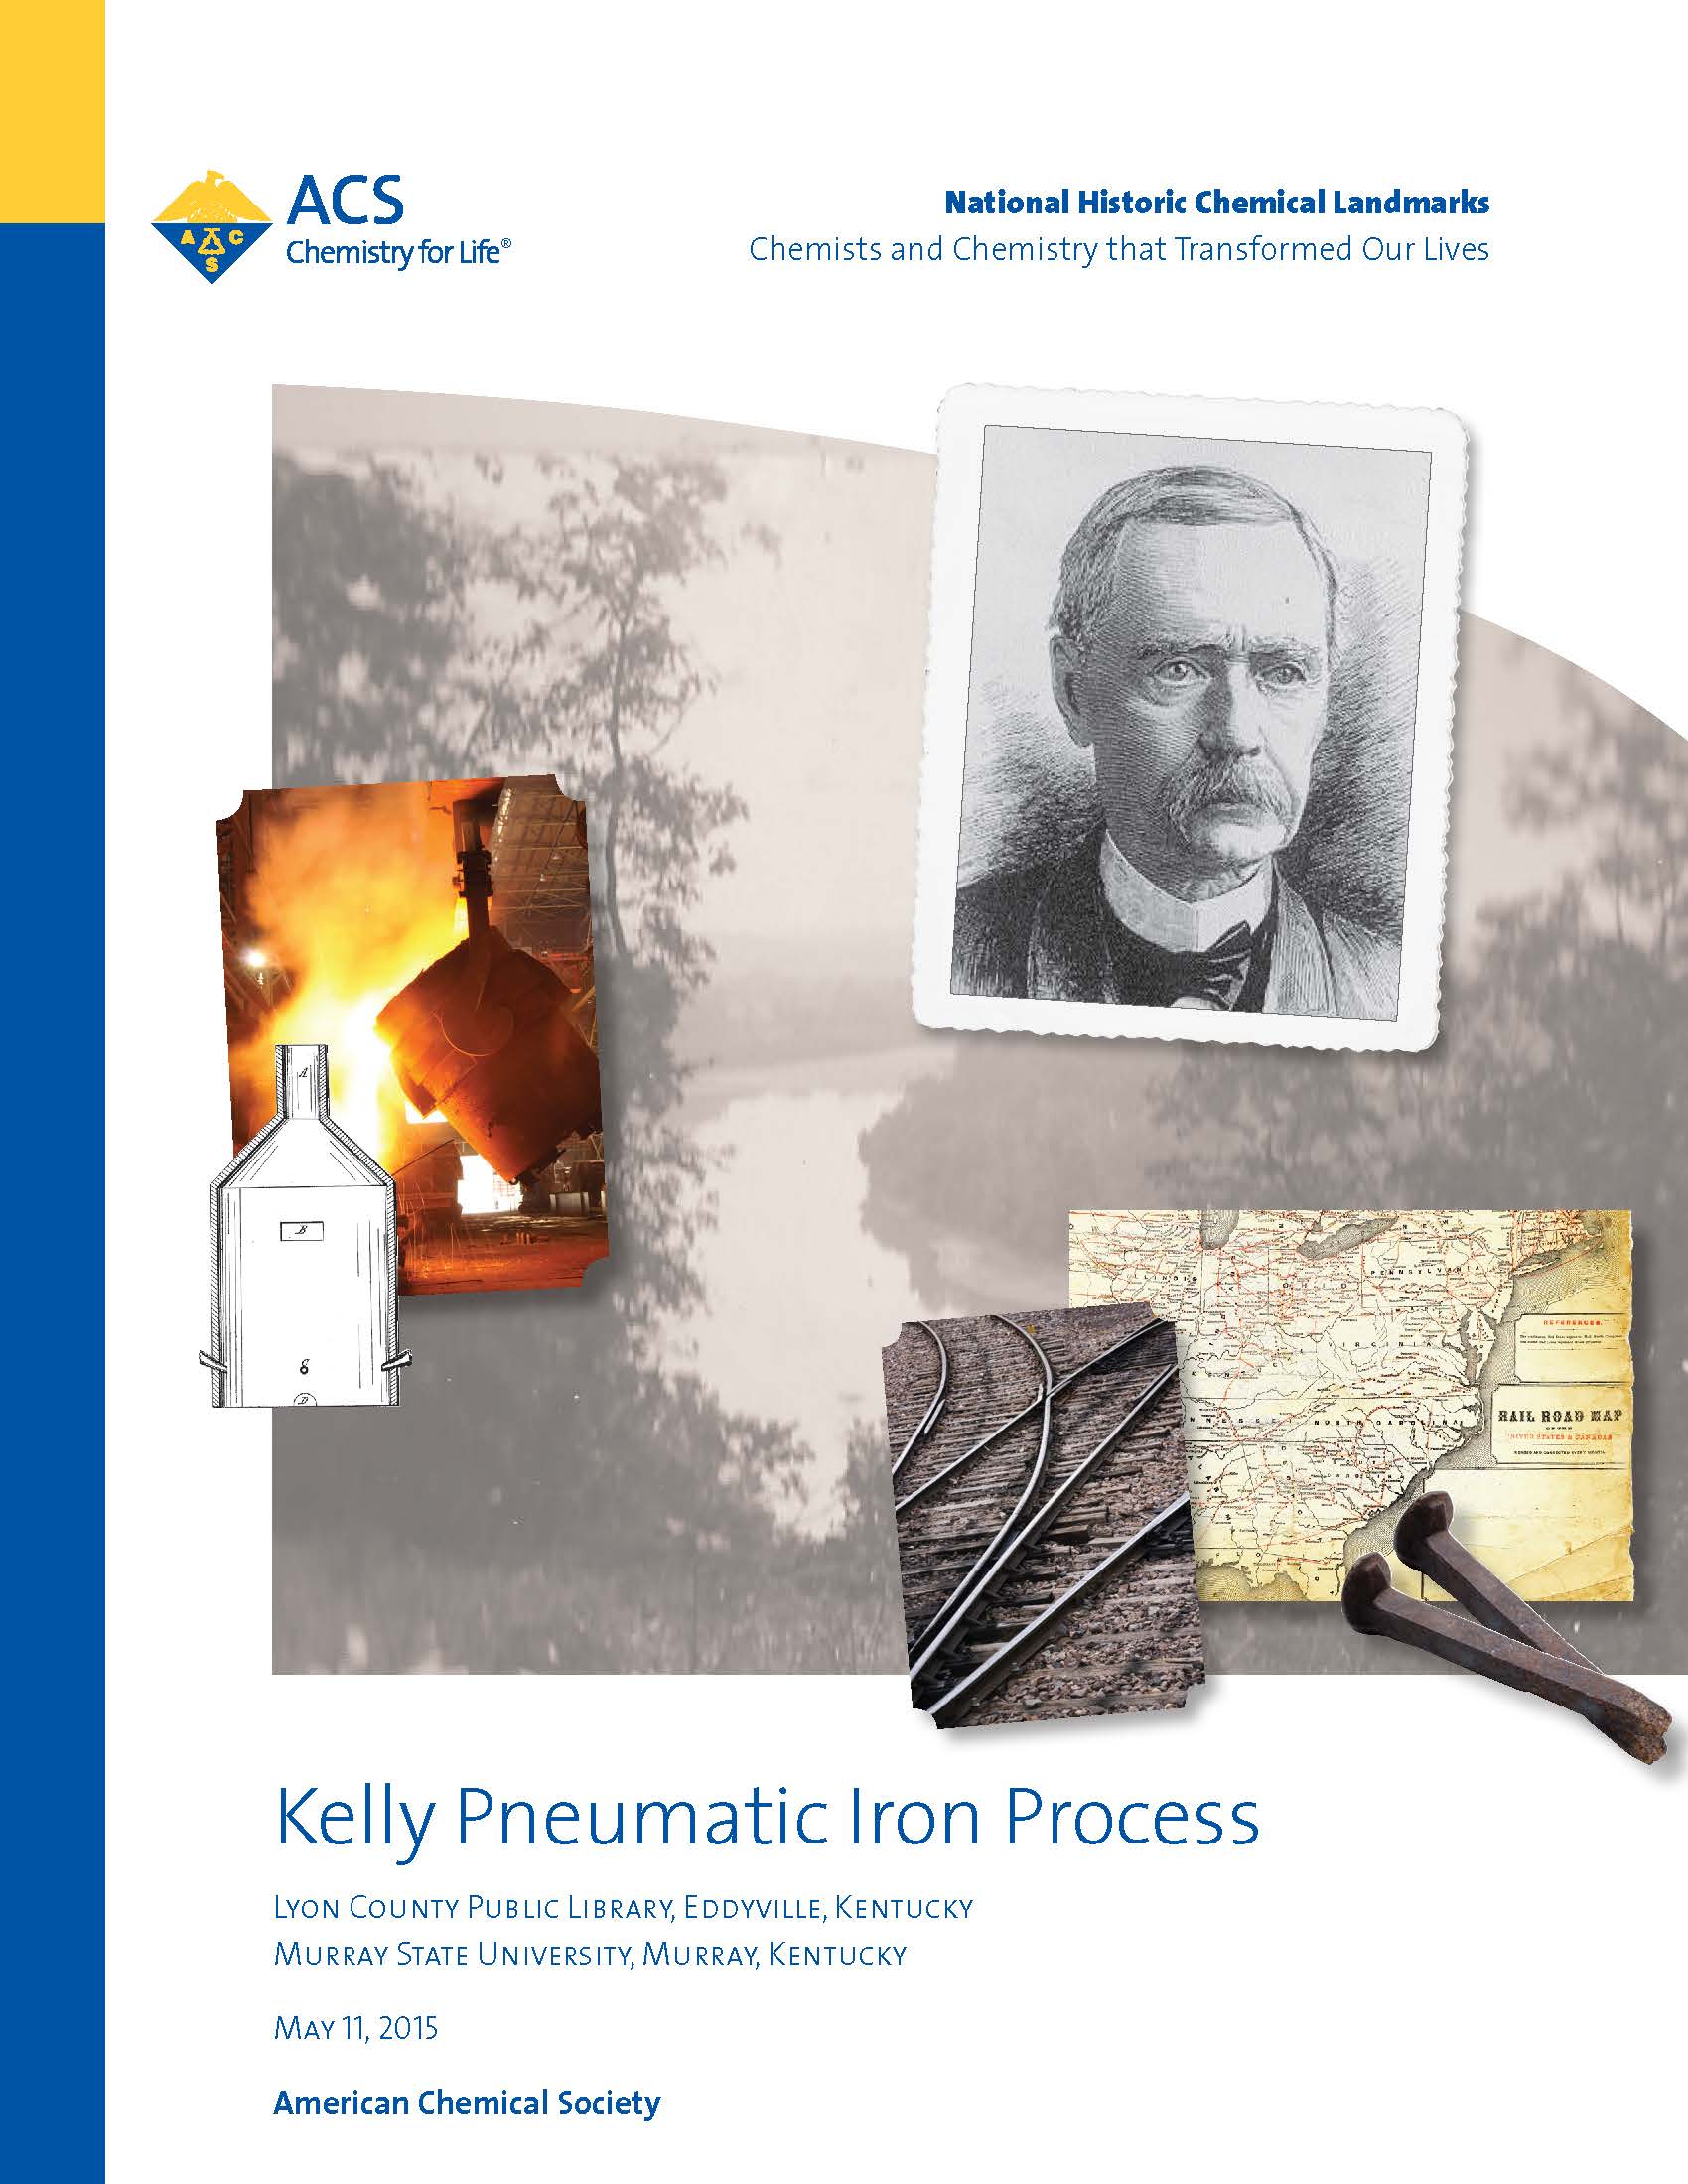 "Kelly Pneumatic Iron Process" booklet